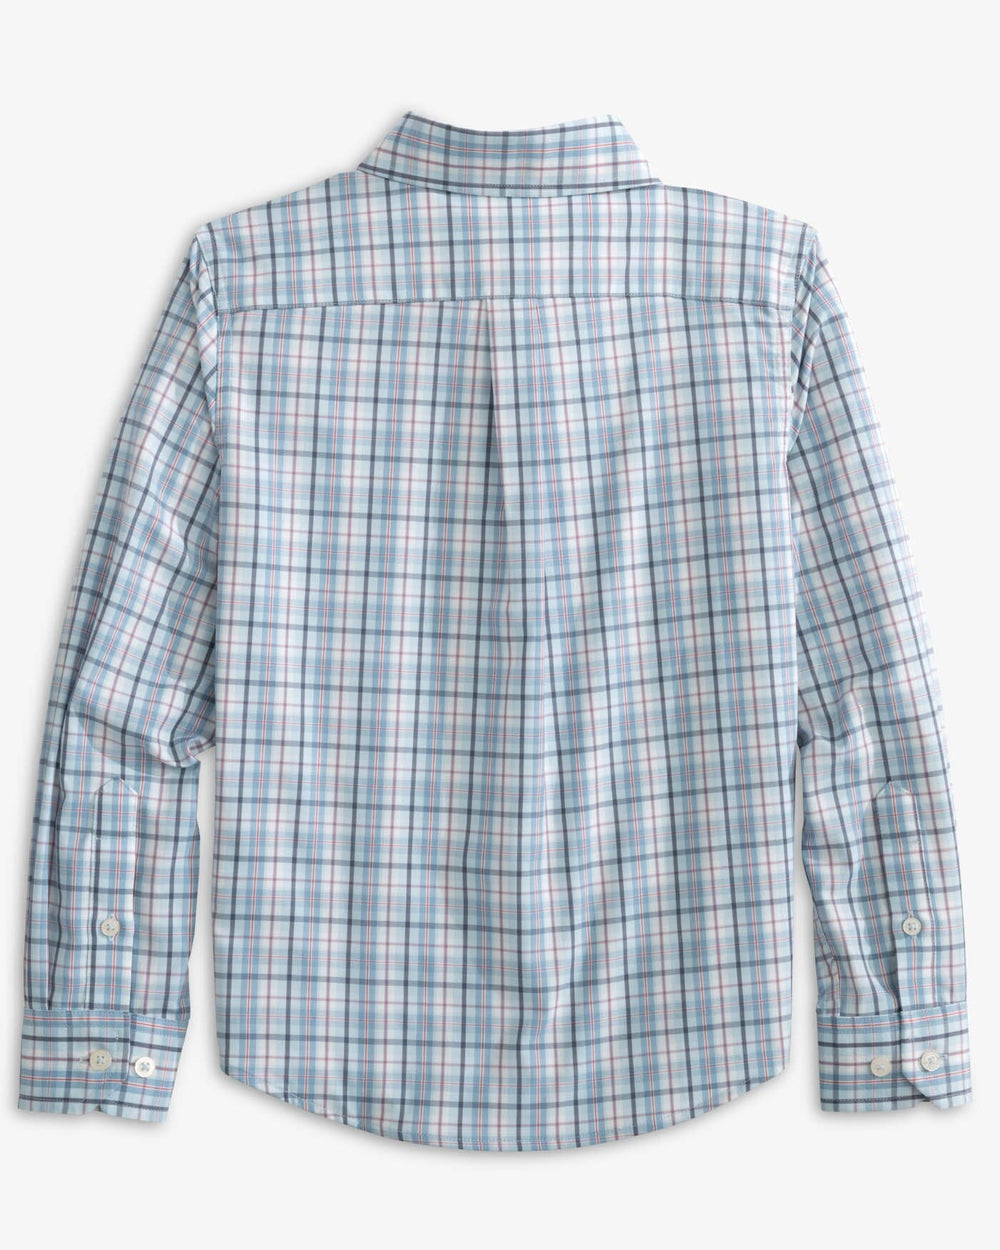 The back view of the Southern Tide Boys Patton Plaid Intercoastal Long Sleeve Sportshirt by Southern Tide - Dream Blue